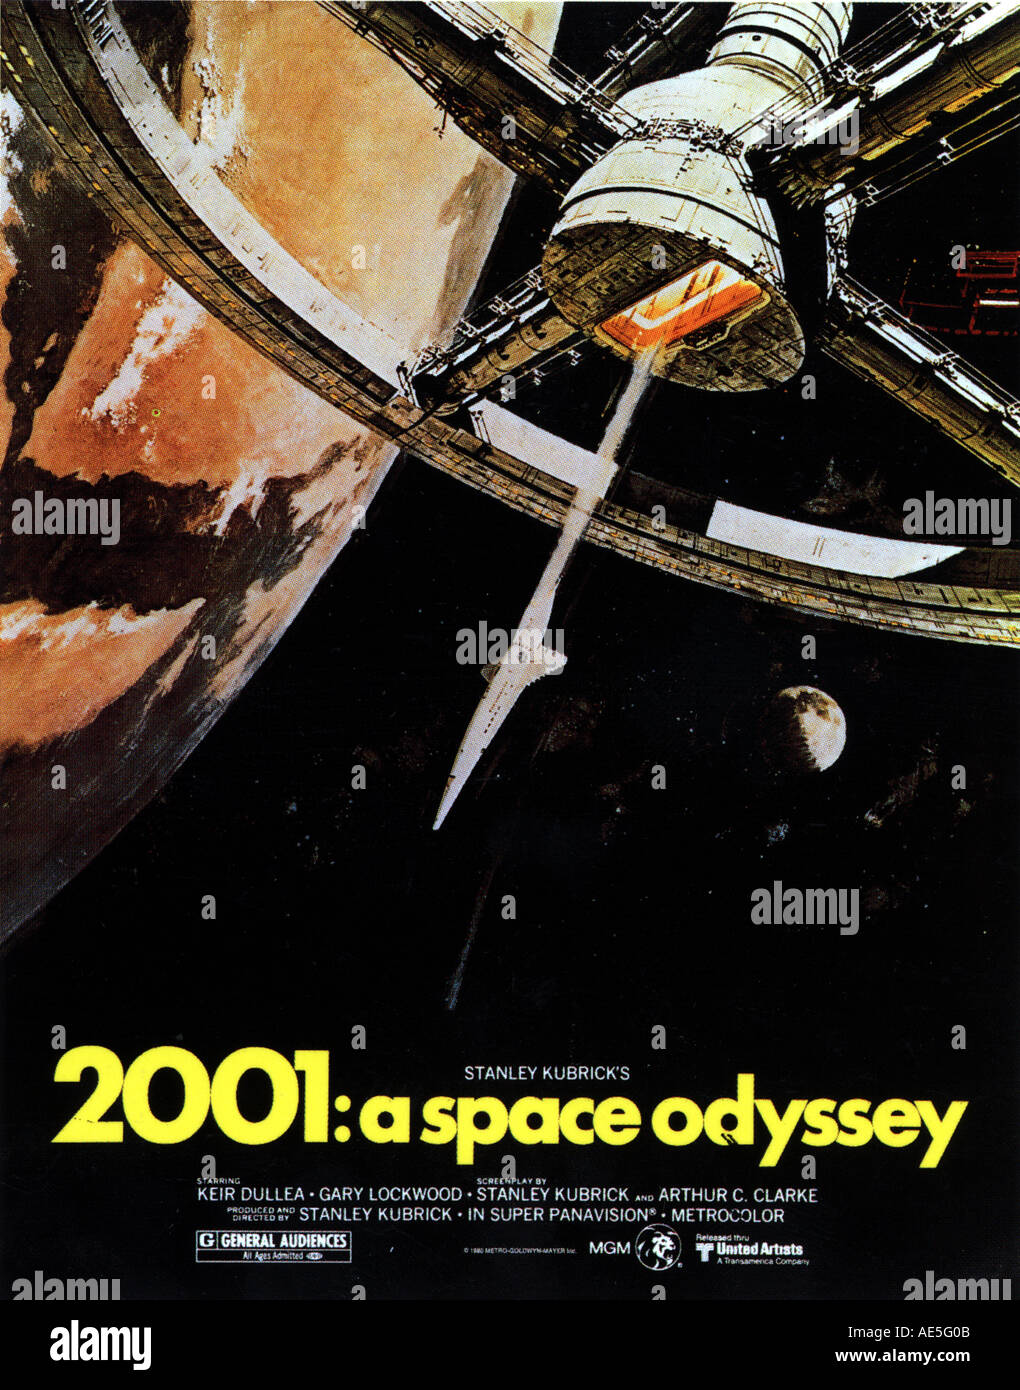 Story of the Scene: 2001: A Space Odyssey, 1968, Stanley Kubrick